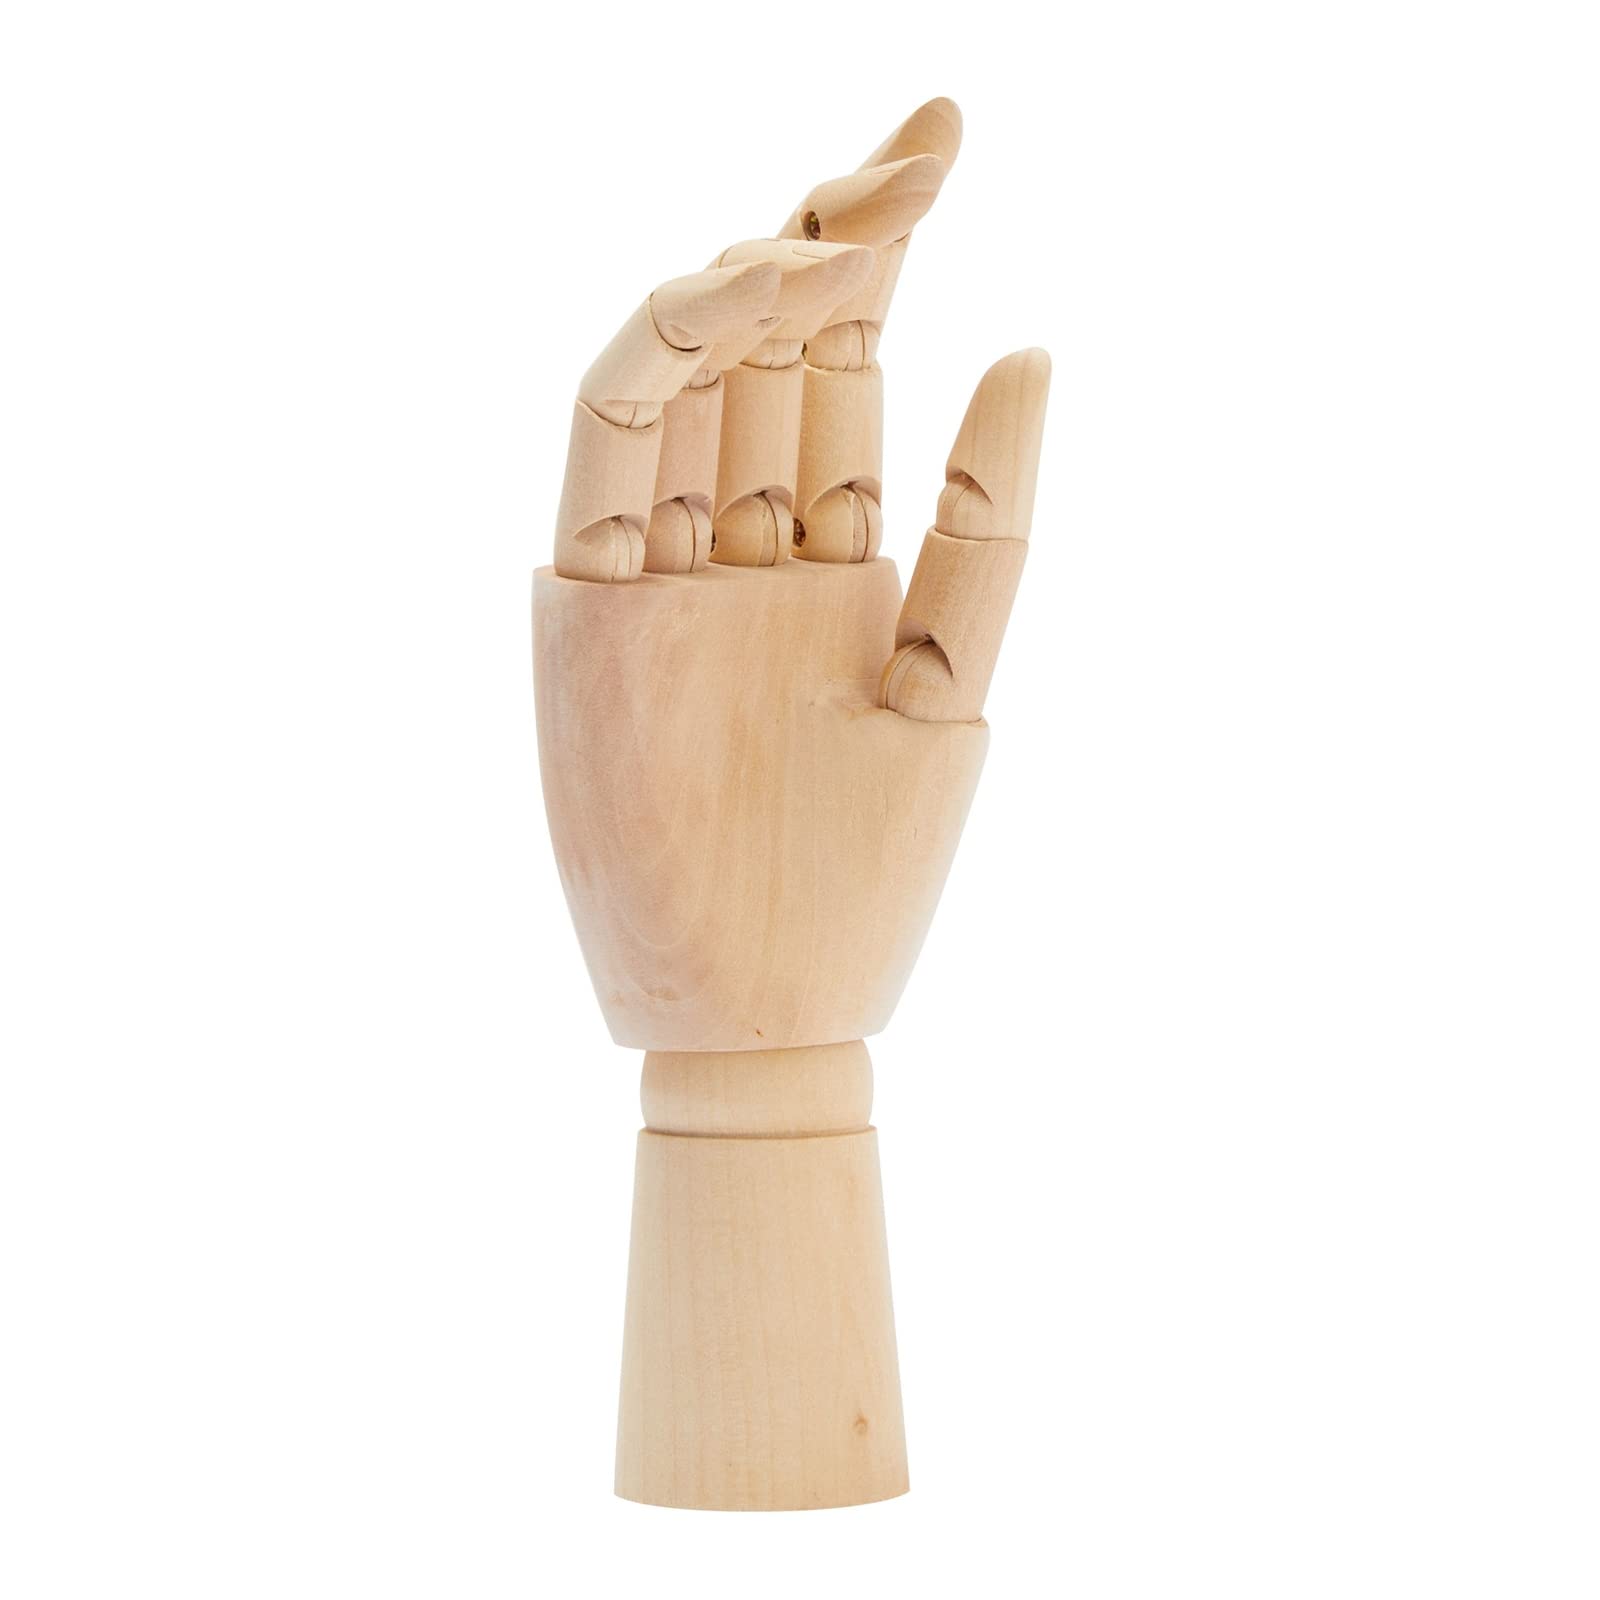 Wooden Hand Model, 7 Art Mannequin Figure with Posable Fingers